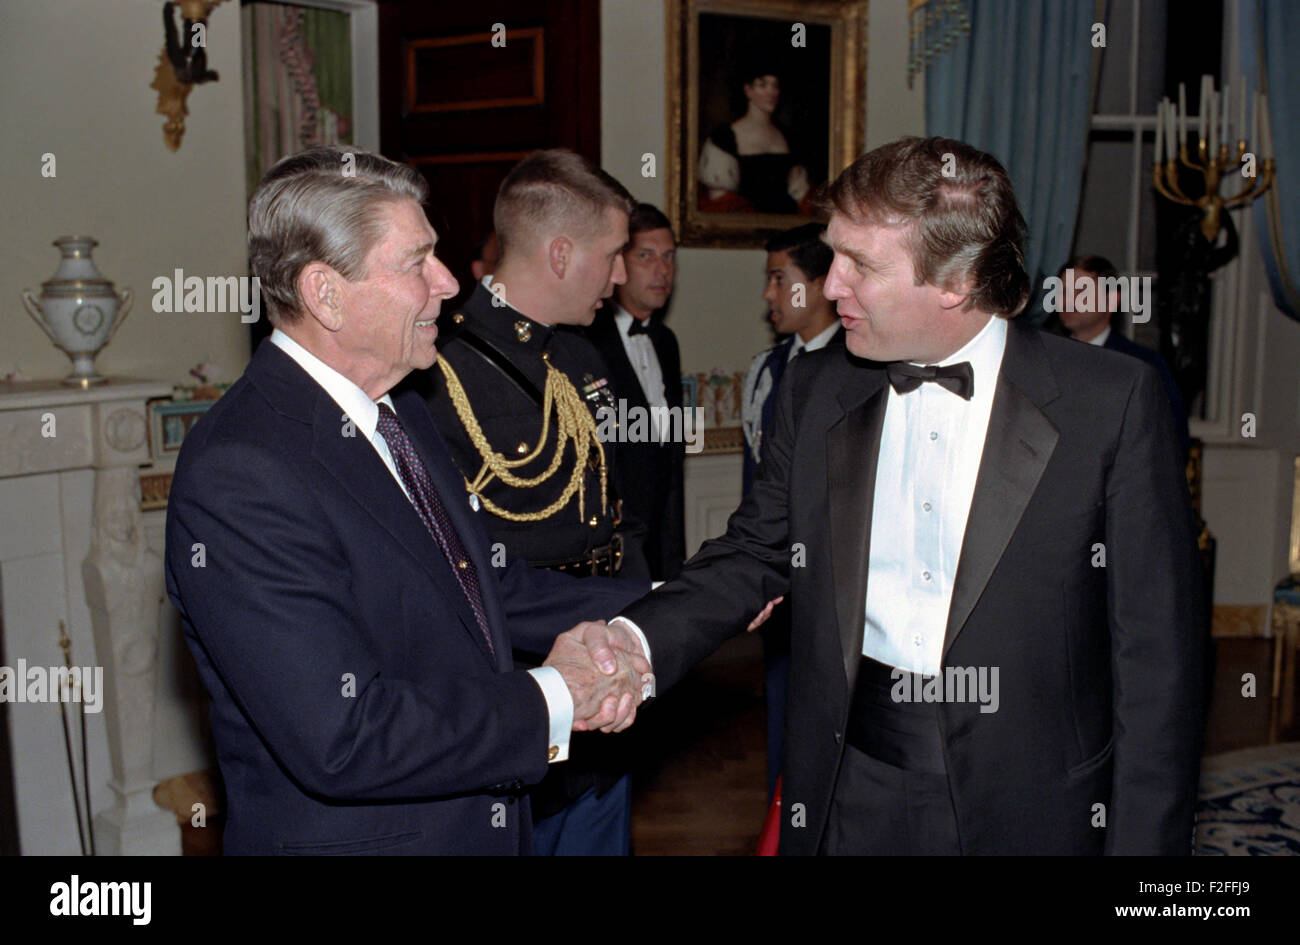 U.S. President Ronald Reagan greets Billionaire developer Donald Trump at a reception for members of the 'Friends of Art and Preservation in Embassies' Foundation in the Blue Room of the White House November 3, 1987 in Washington, DC. Stock Photo